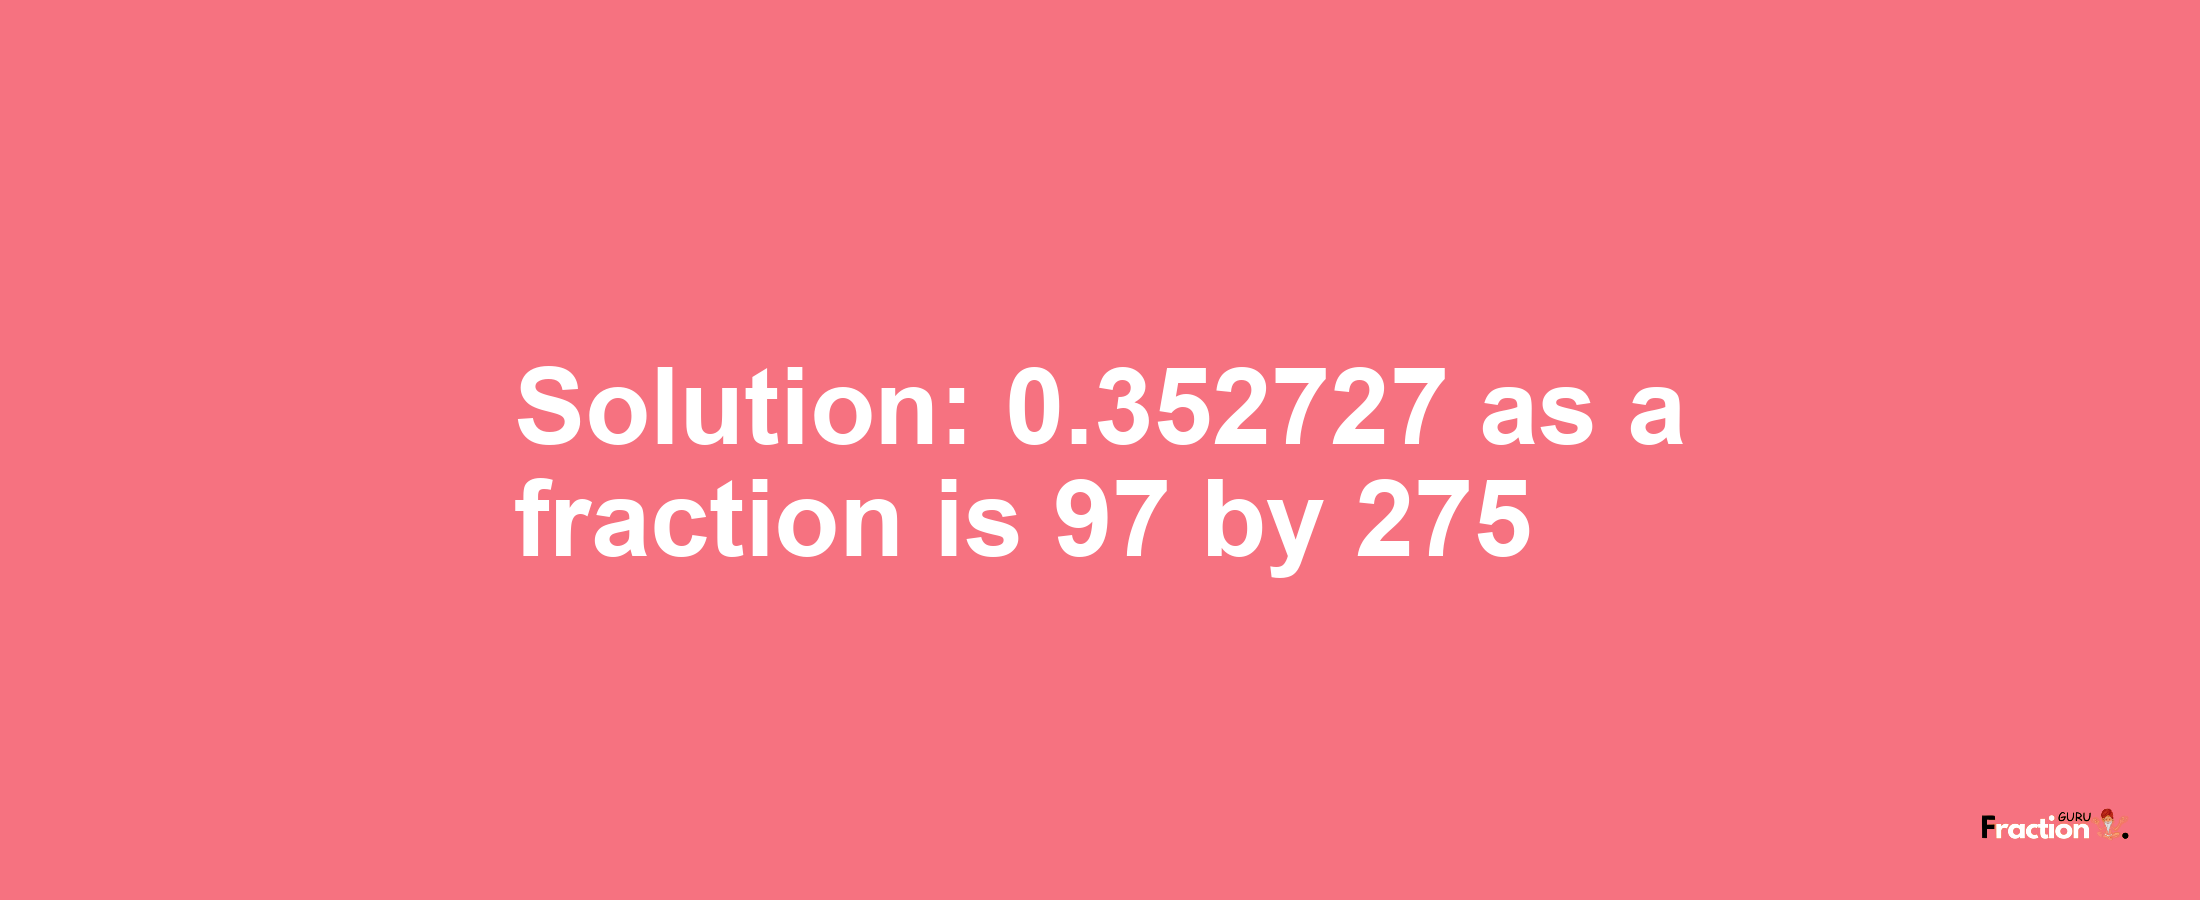 Solution:0.352727 as a fraction is 97/275